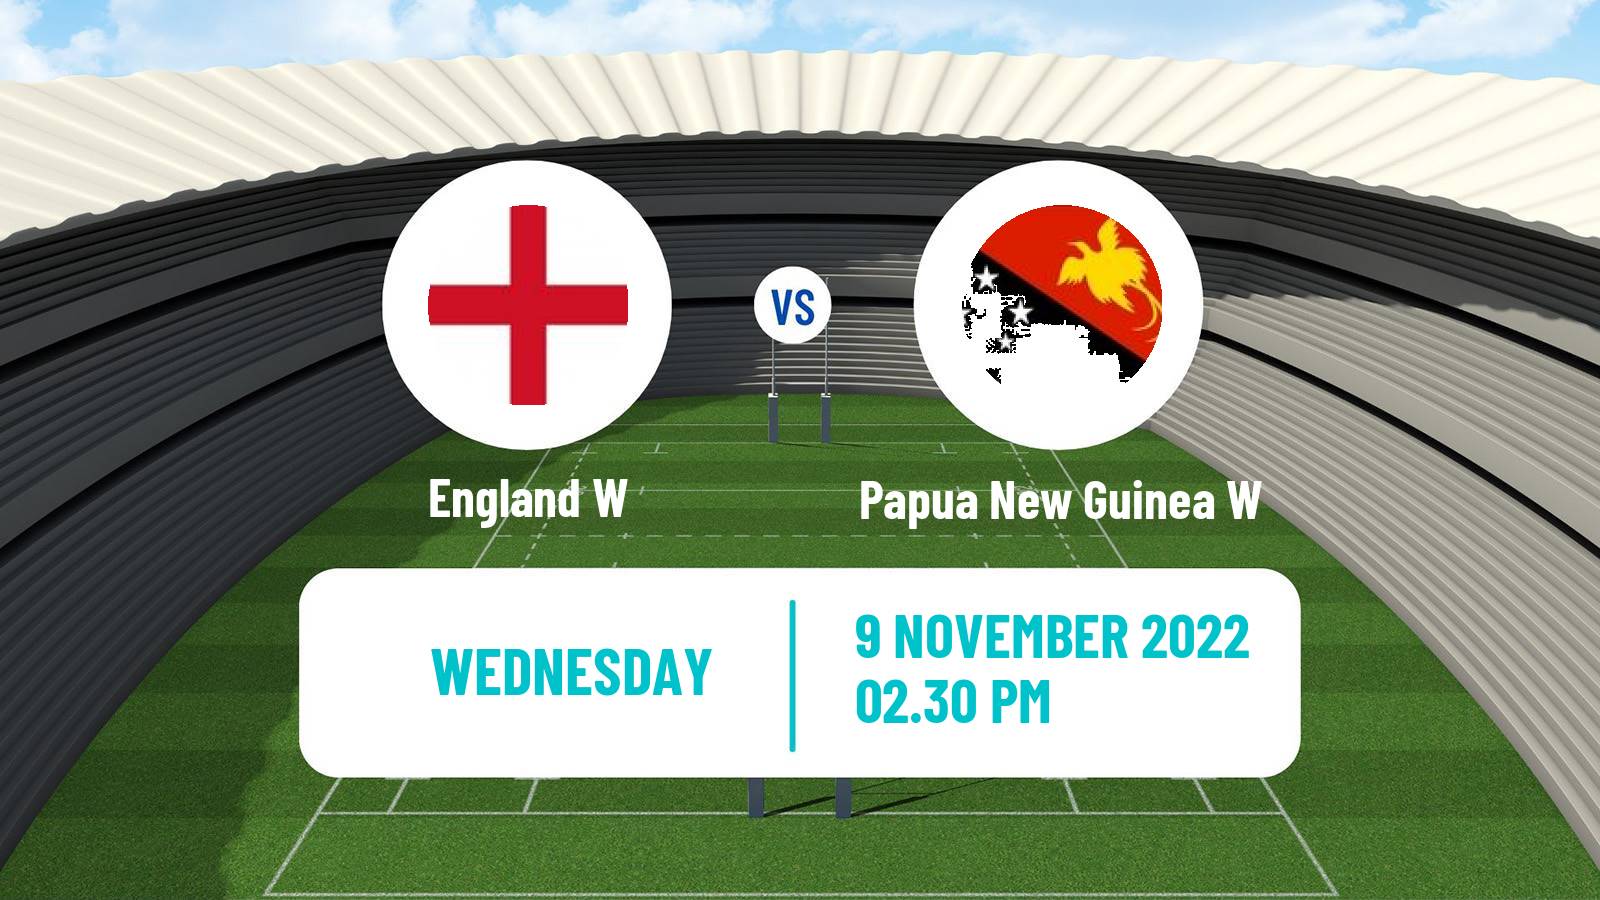 Rugby league World Cup Rugby League Women England W - Papua New Guinea W